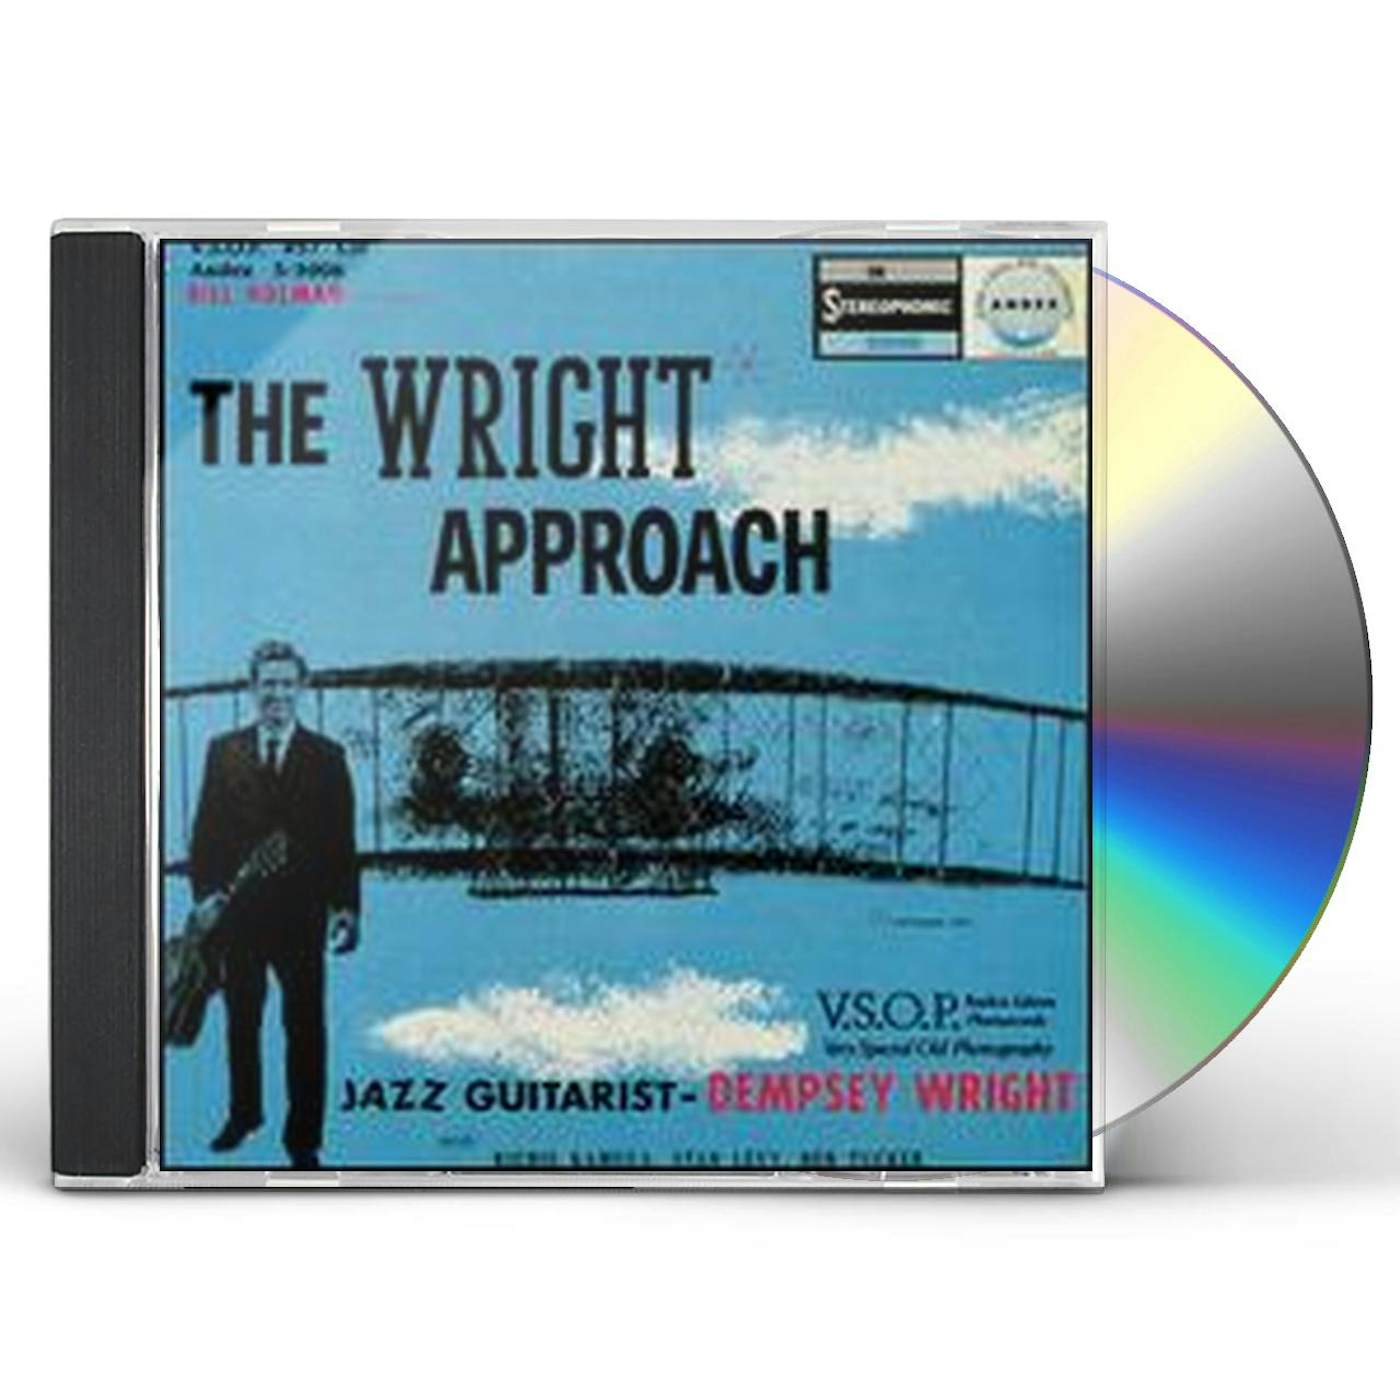 Dempsey Wright WRIGHT APPROACH CD